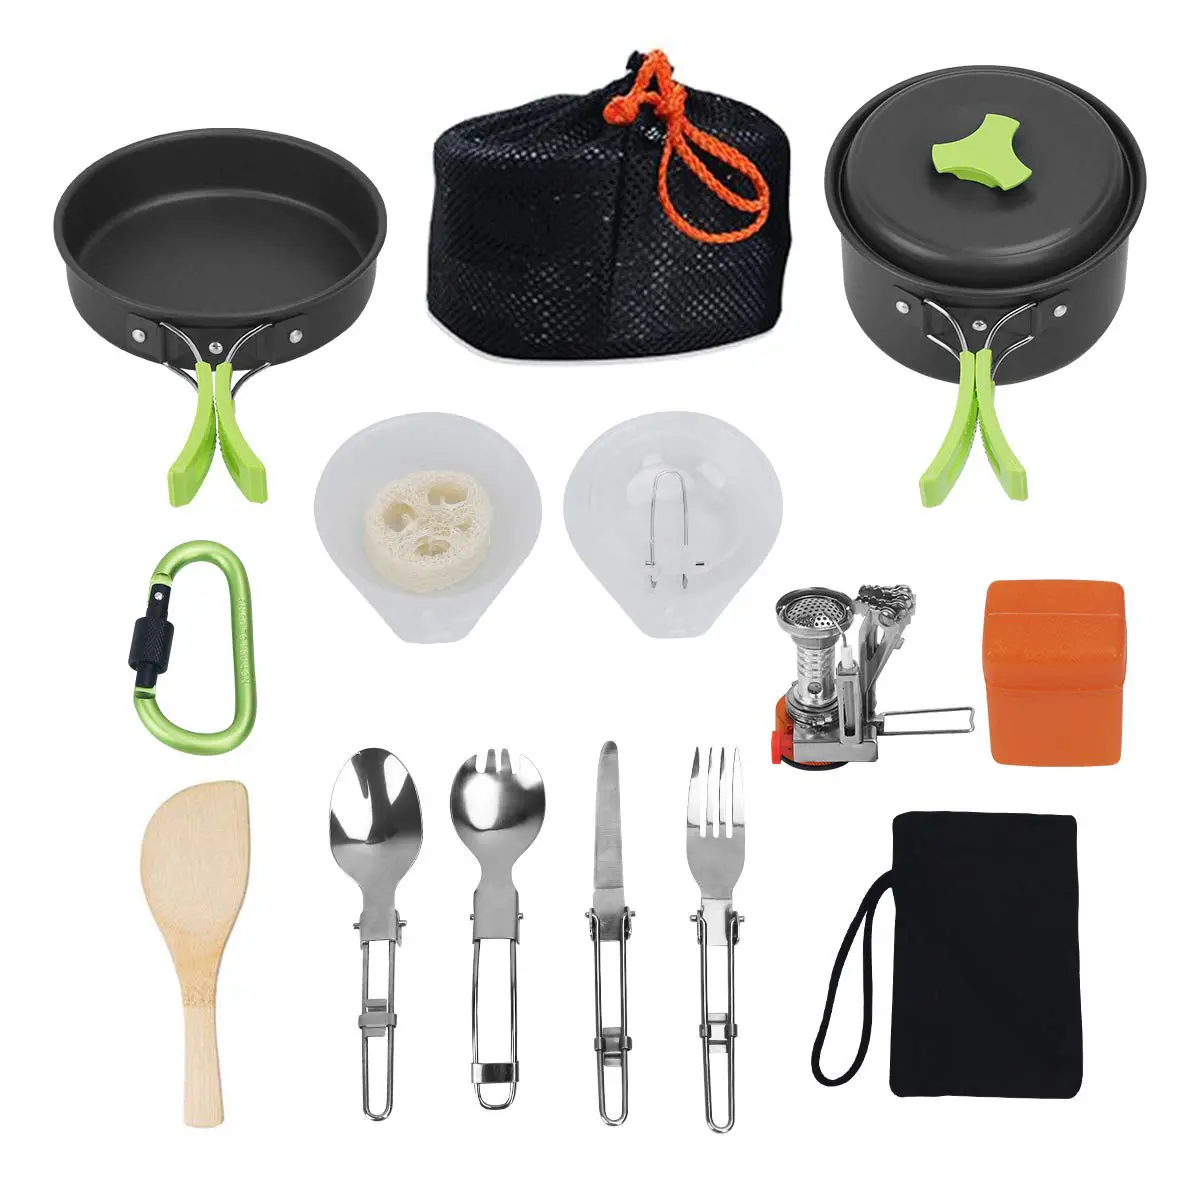 16Pcs Hiking Backpacking Non Stick Portable Outdoor Camping Cookware Set / Mess Kit / Cookset / Camp Kitchen